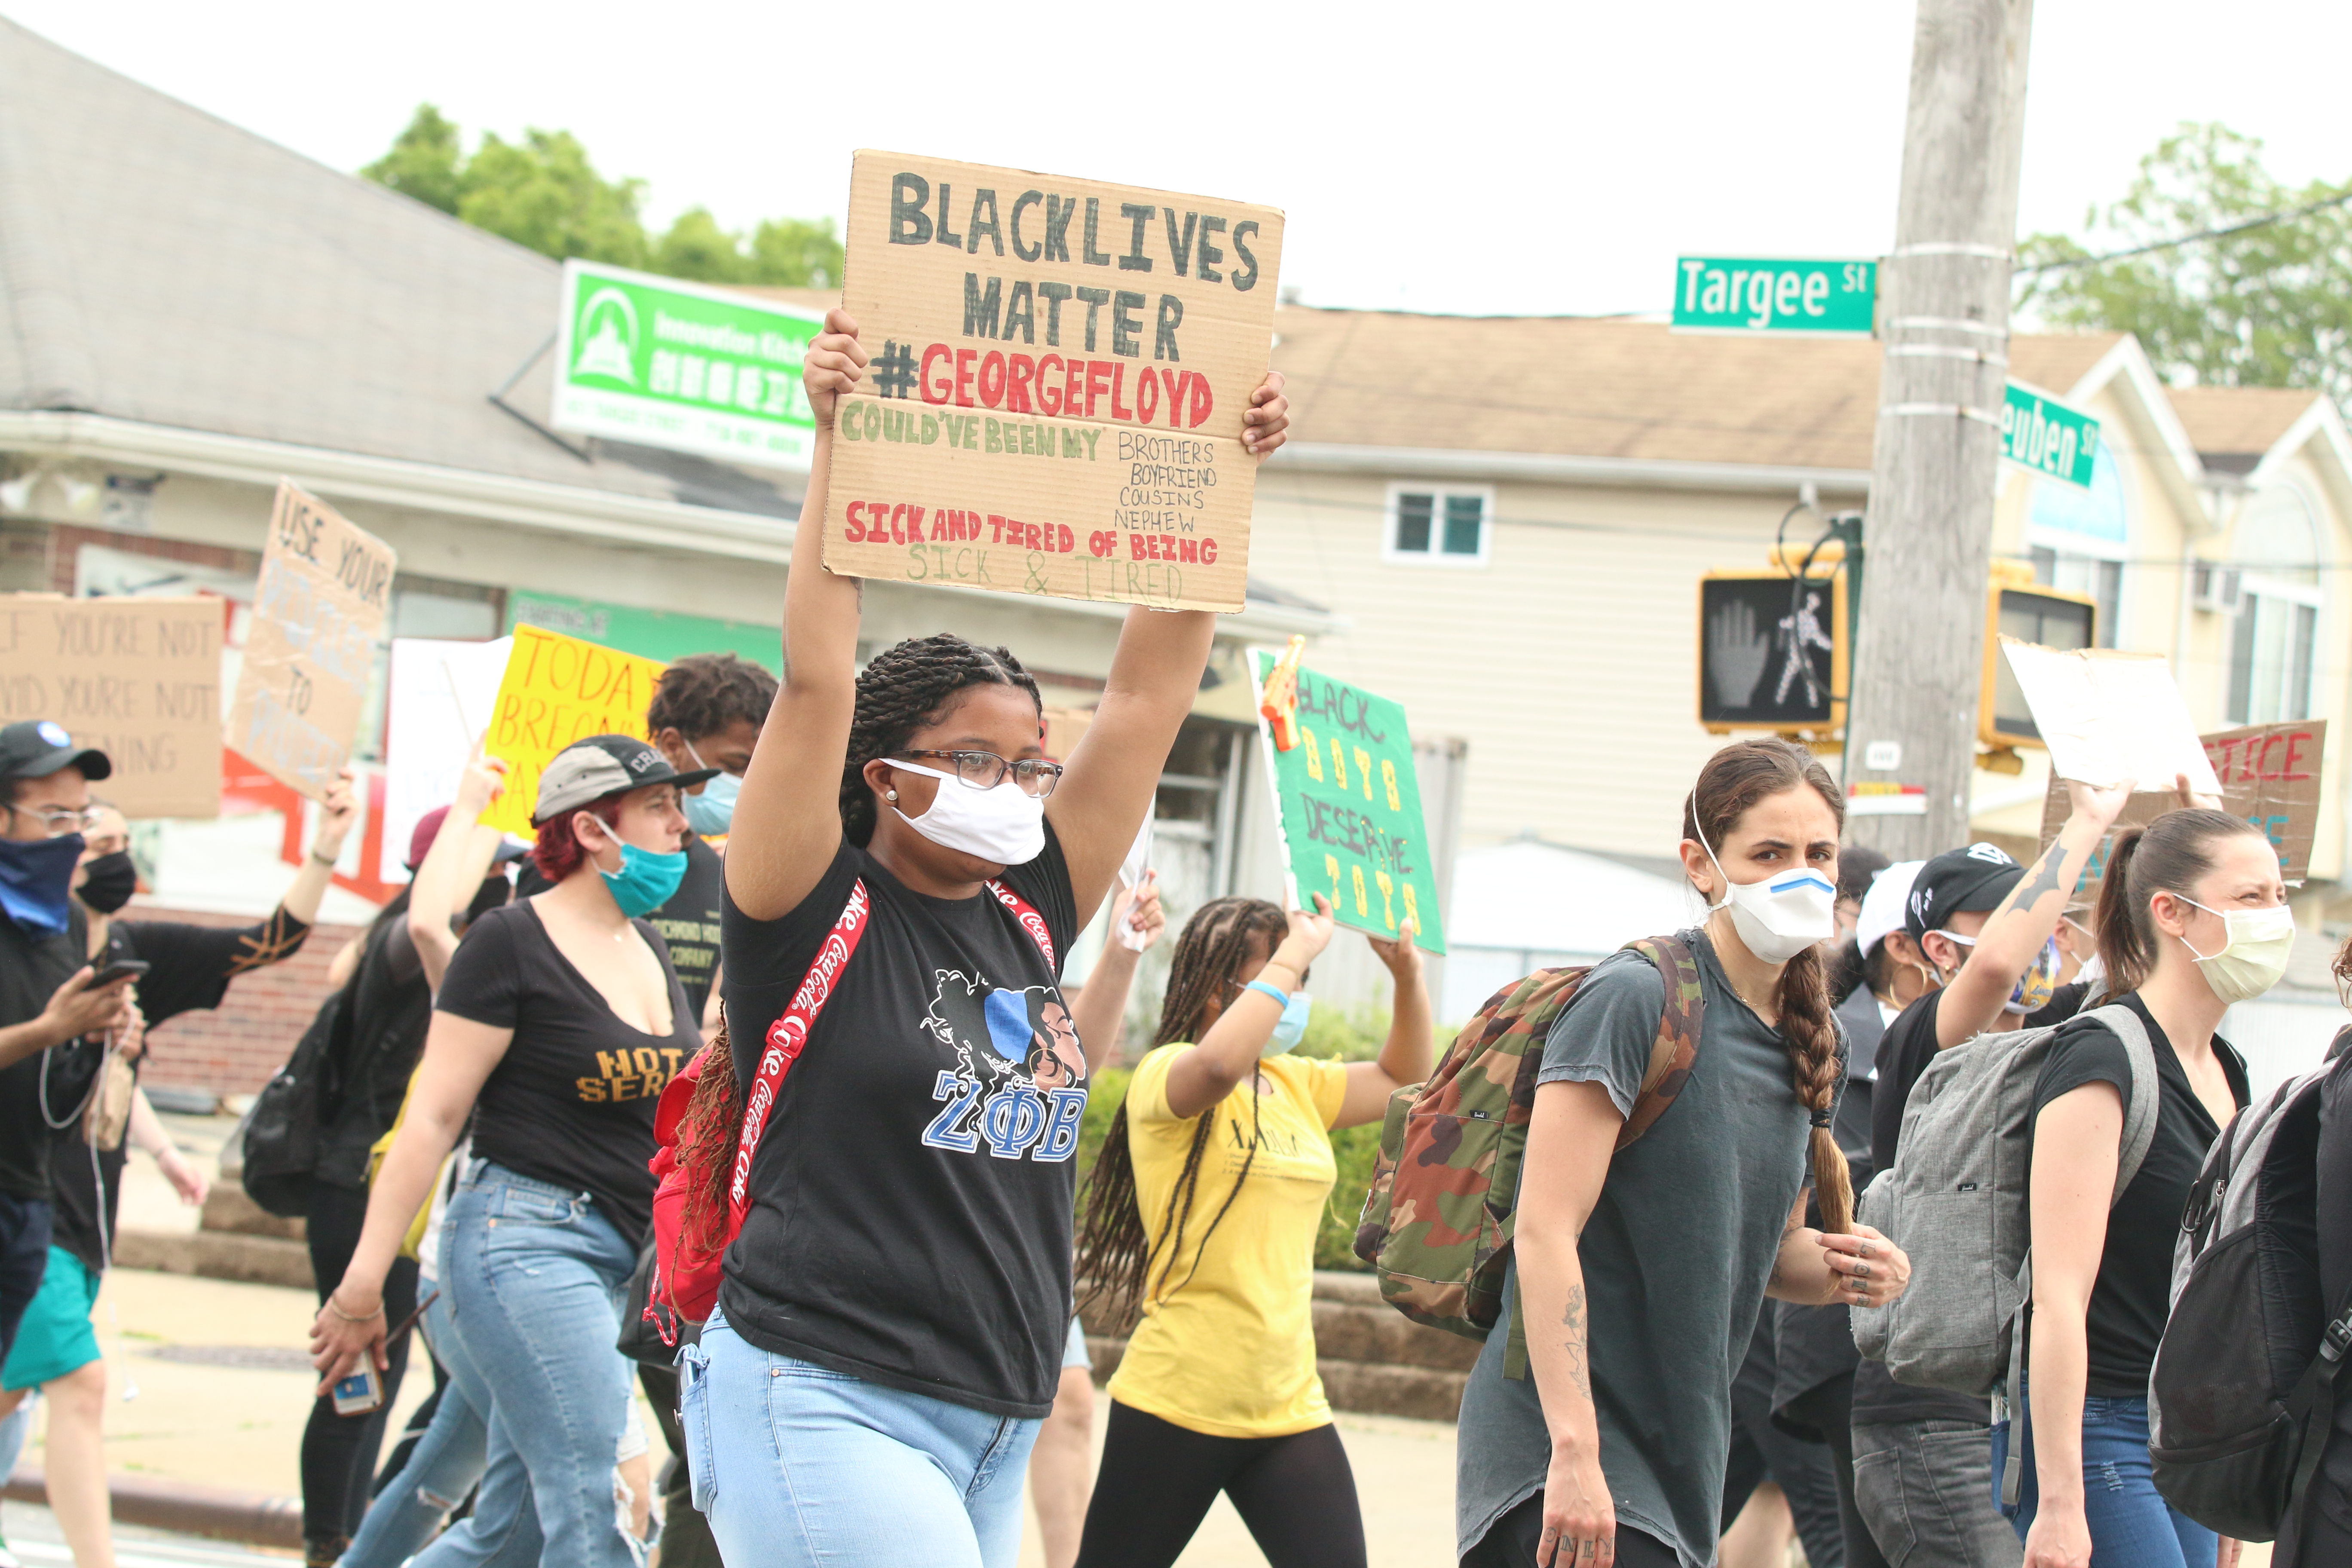 Protesters march to the 122 precinct through Dongan Hills along Richmond Road.  (Staten Island Advance/Jan Somma-Hammel)